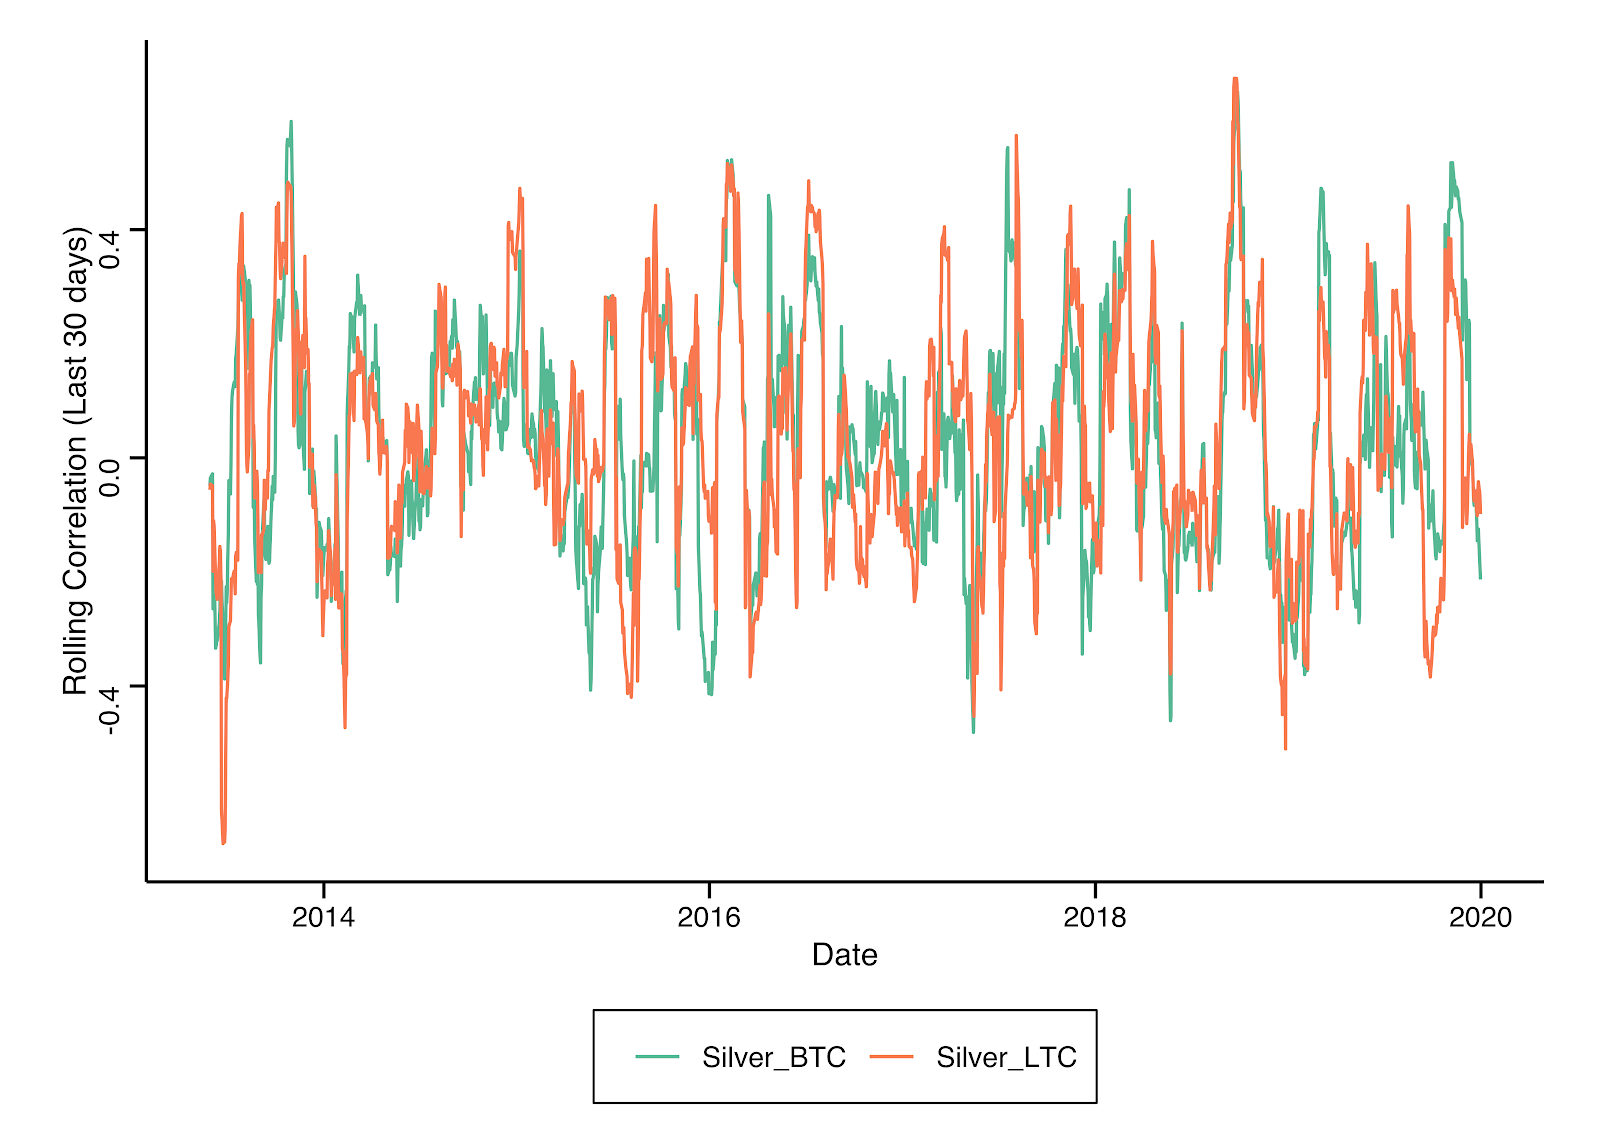 Rolling correlations between Bitcoin/silver, and Litecoin/silver from May 2013-December 2019